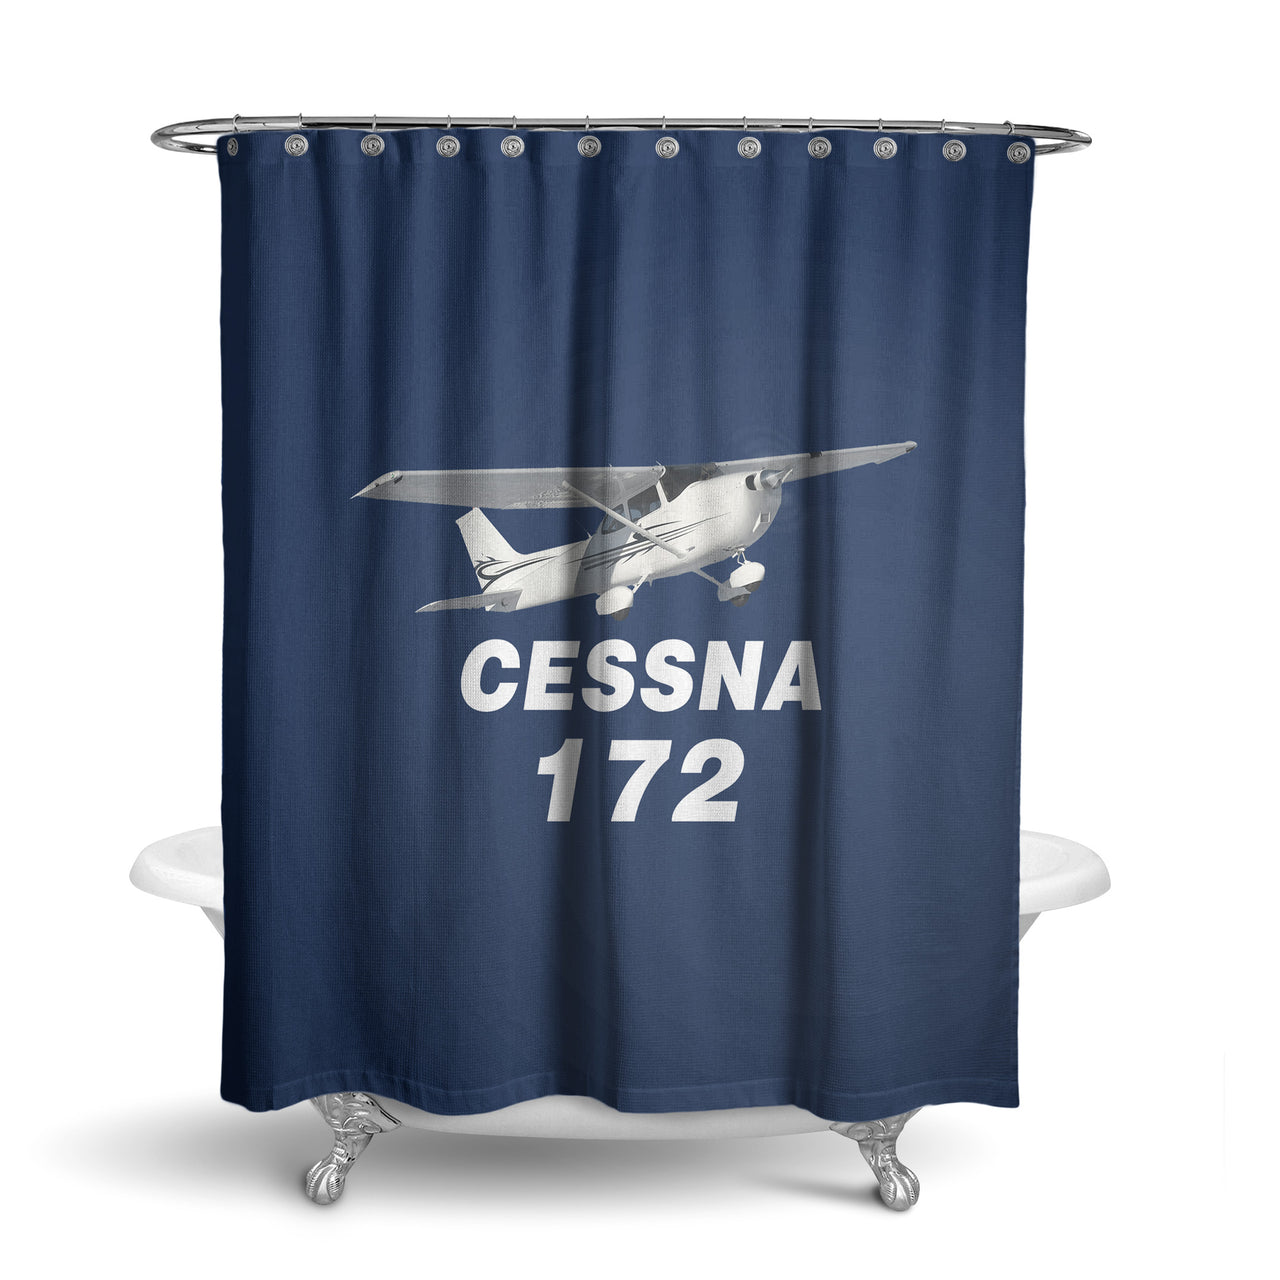 The Cessna 172 Designed Shower Curtains